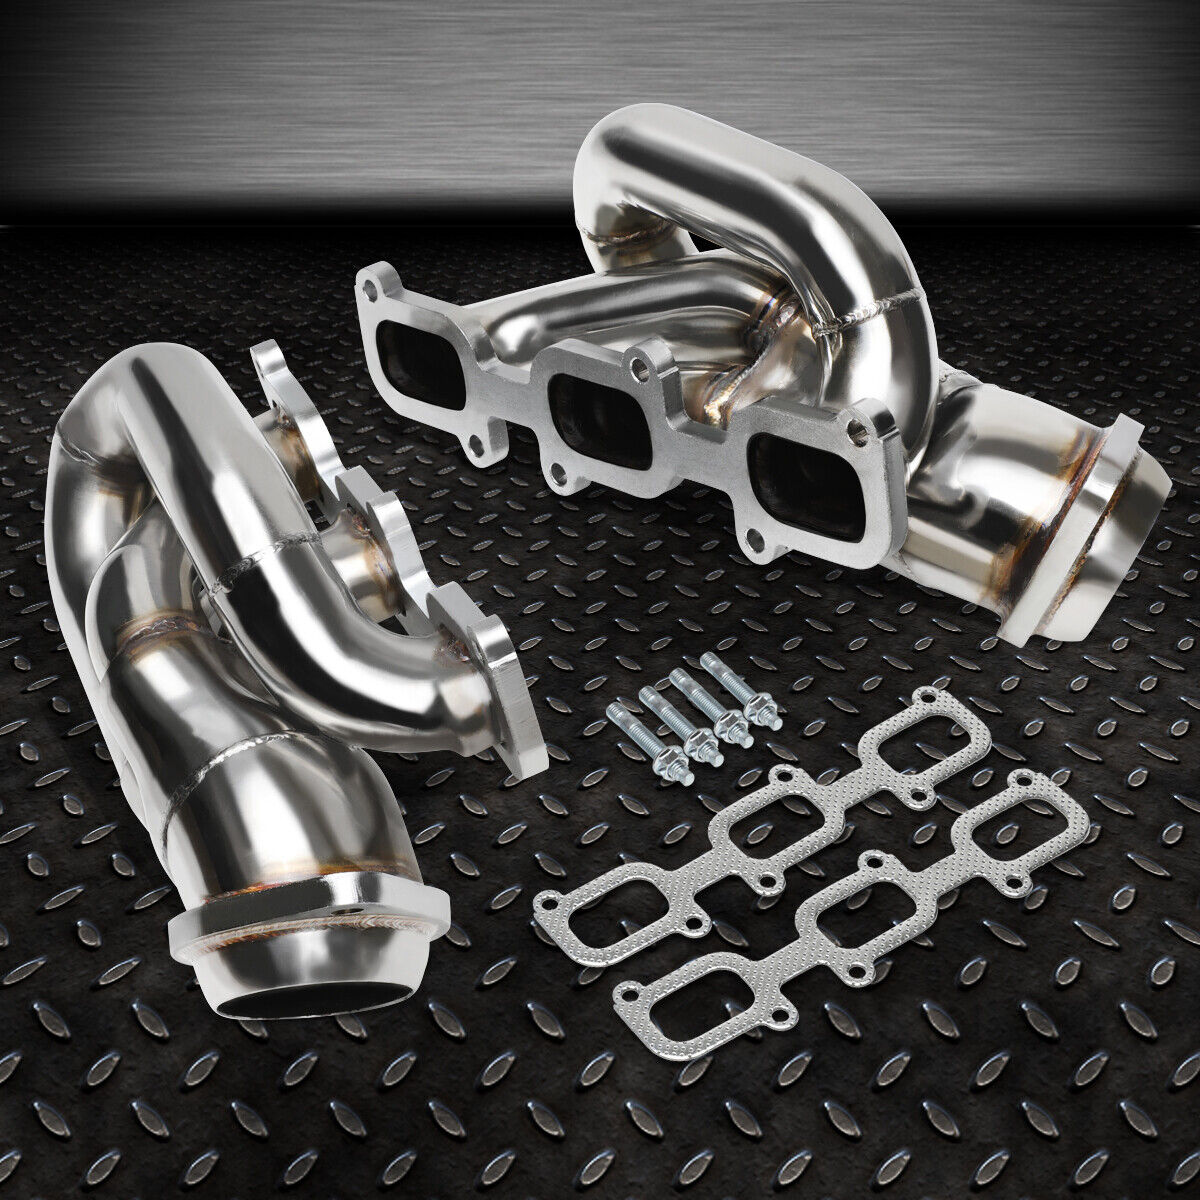 FOR 11-15 FORD MUSTANG 3.7 V6 D2C SHORTY STAINLESS STEEL HEADER EXHAUST MANIFOLD